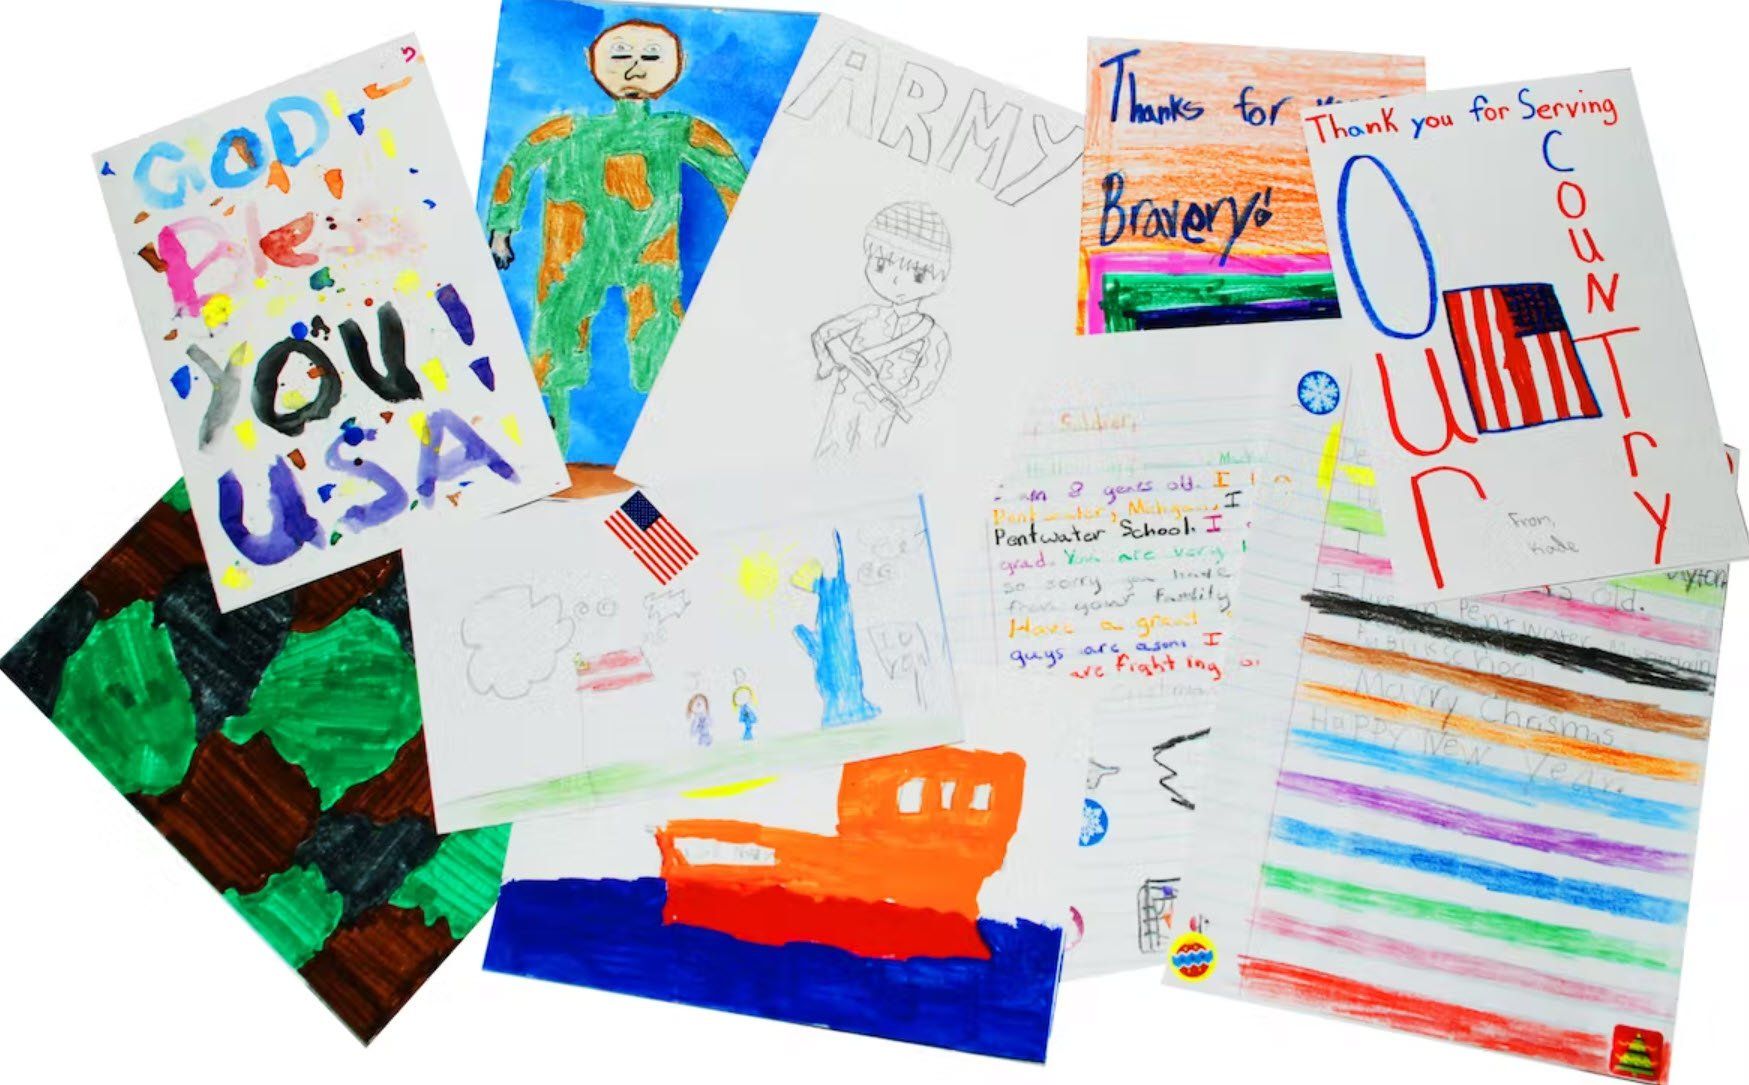 Cards and letters included in care packages